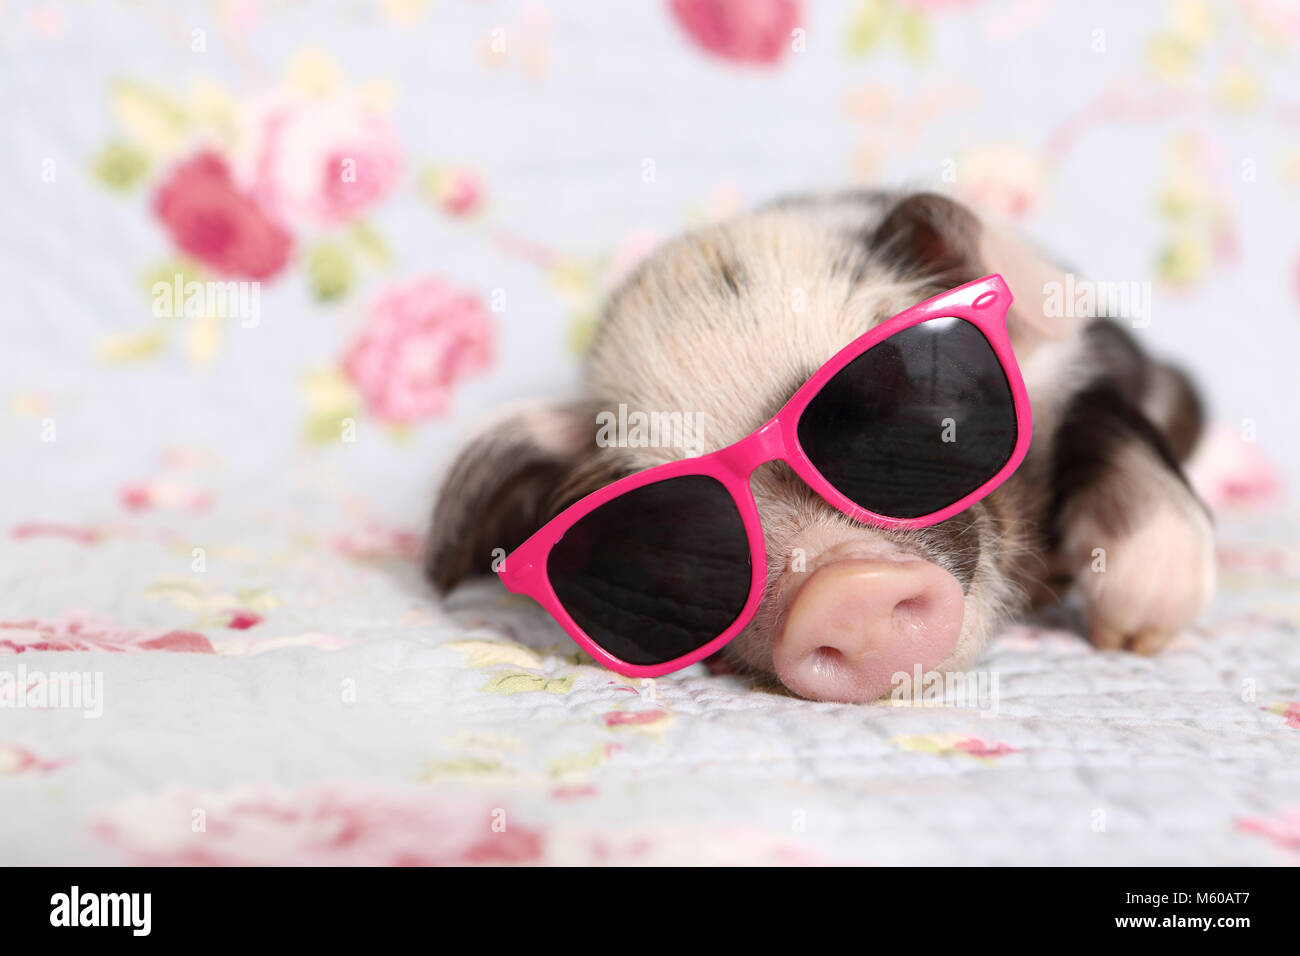 Domestic Pig, Turopolje x ?. Piglet (1 week old) wearing sunglasses, sleeping. Studio picture against a blue background with rose flower print. Germany Stock Photo